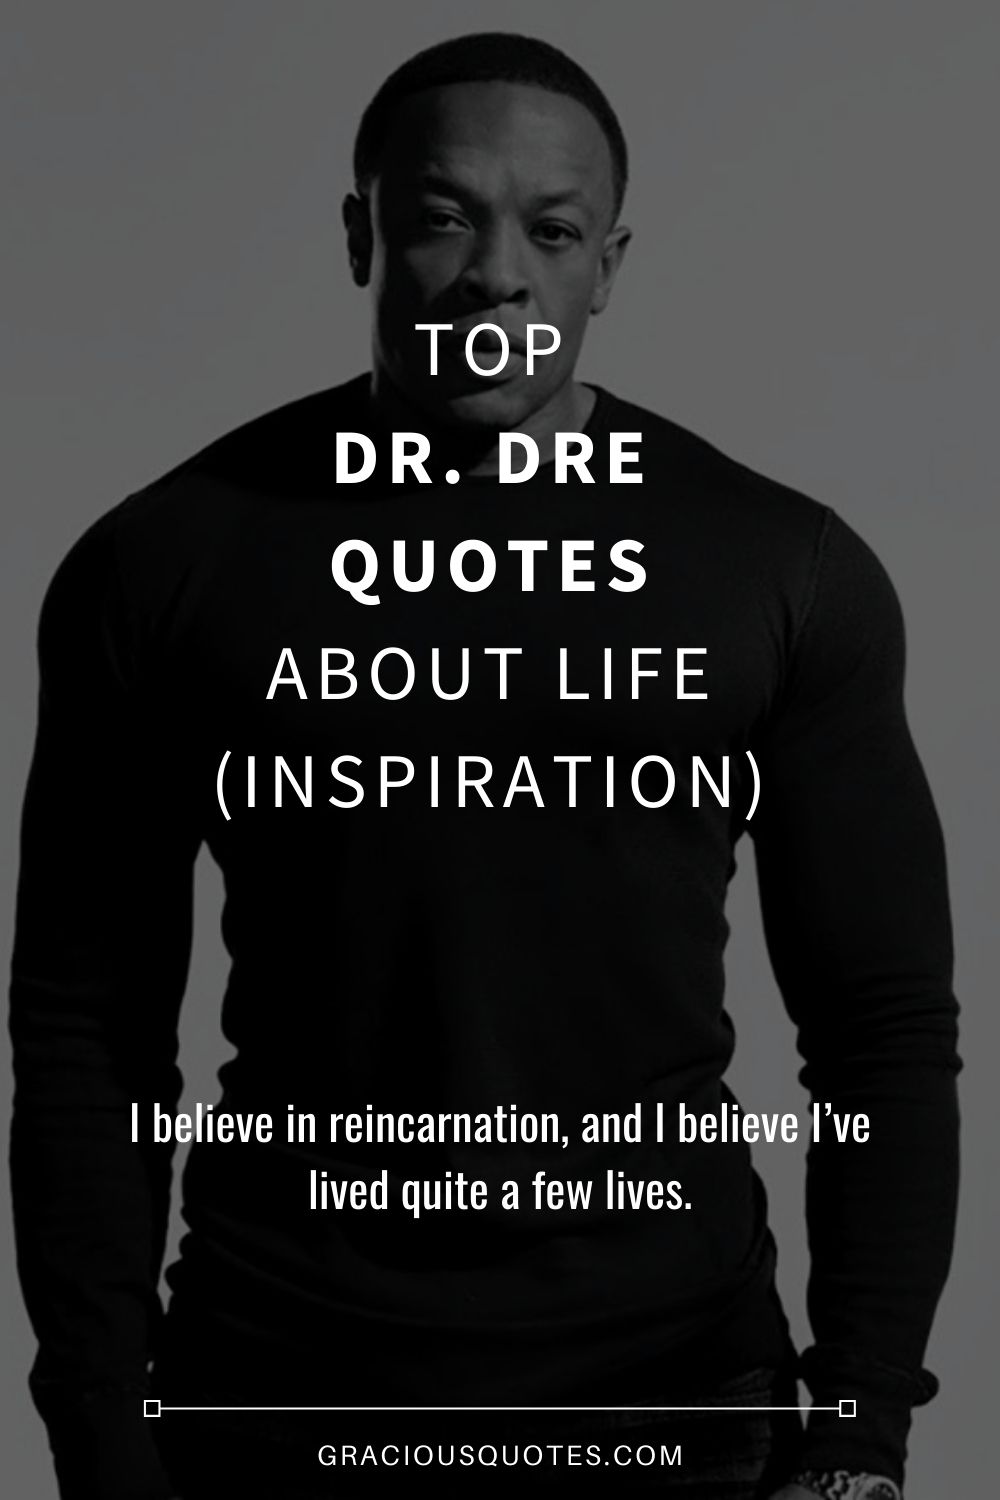 Top Dr. Dre Quotes About Life (INSPIRATION) - Gracious Quotes